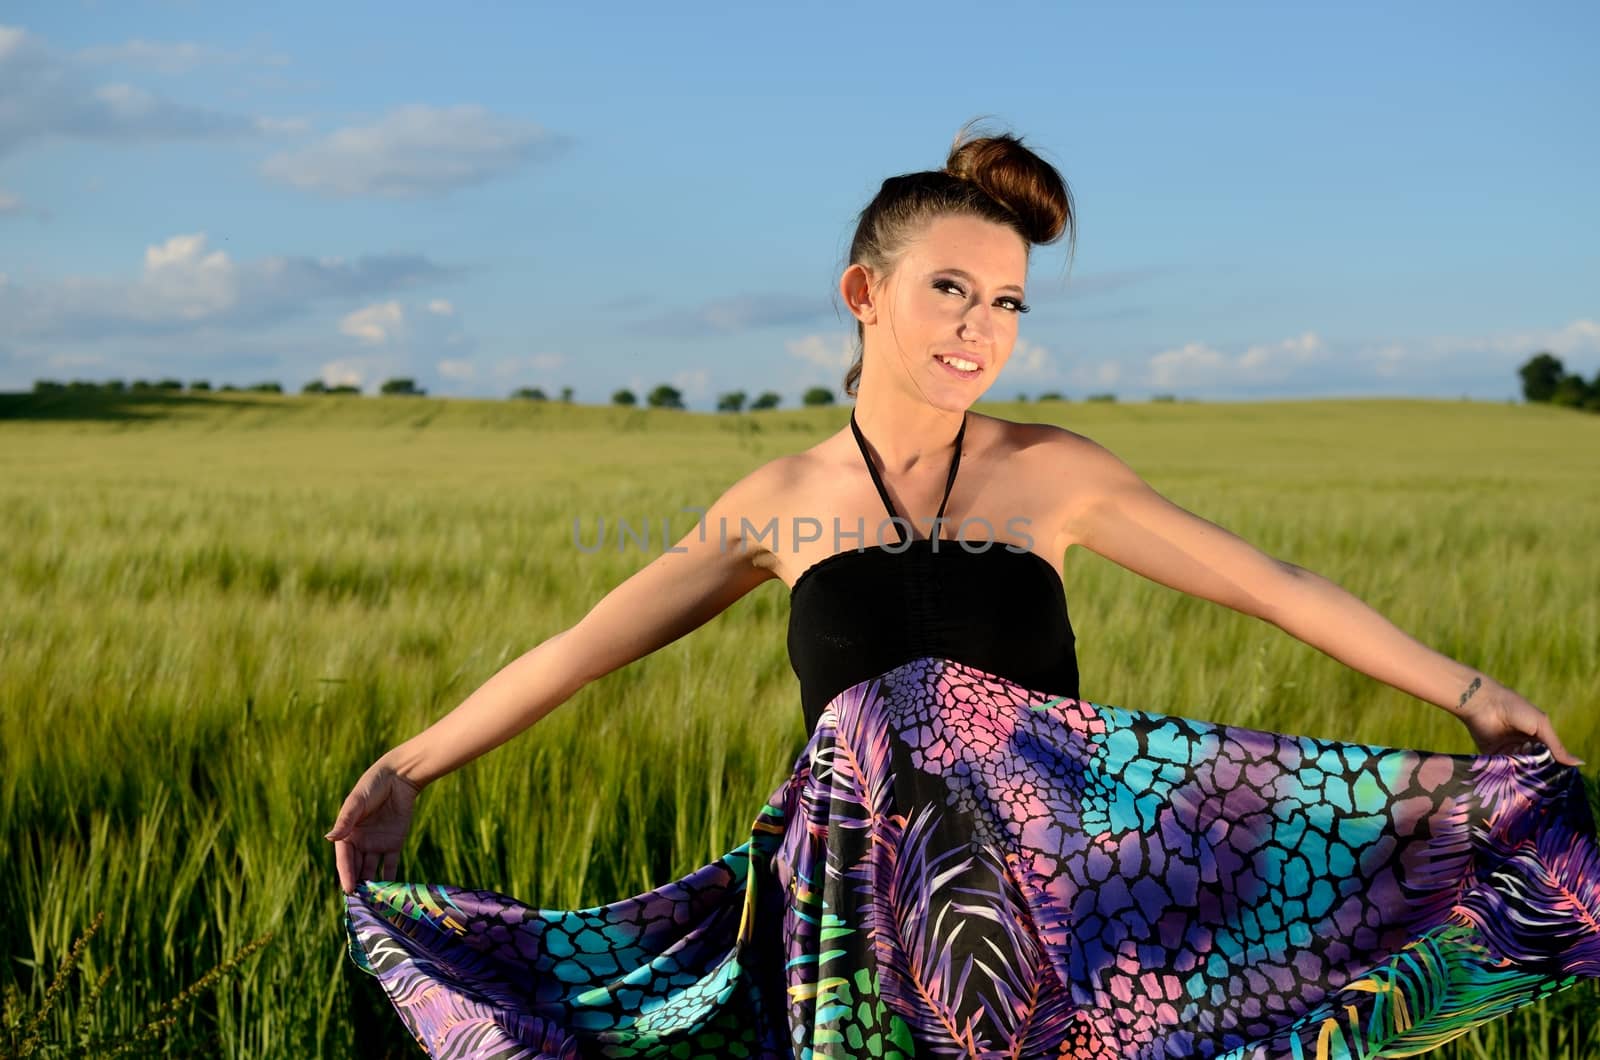 Young female model from Poland surrounded by green fields of grains. Girl portrait with colorful skirt.